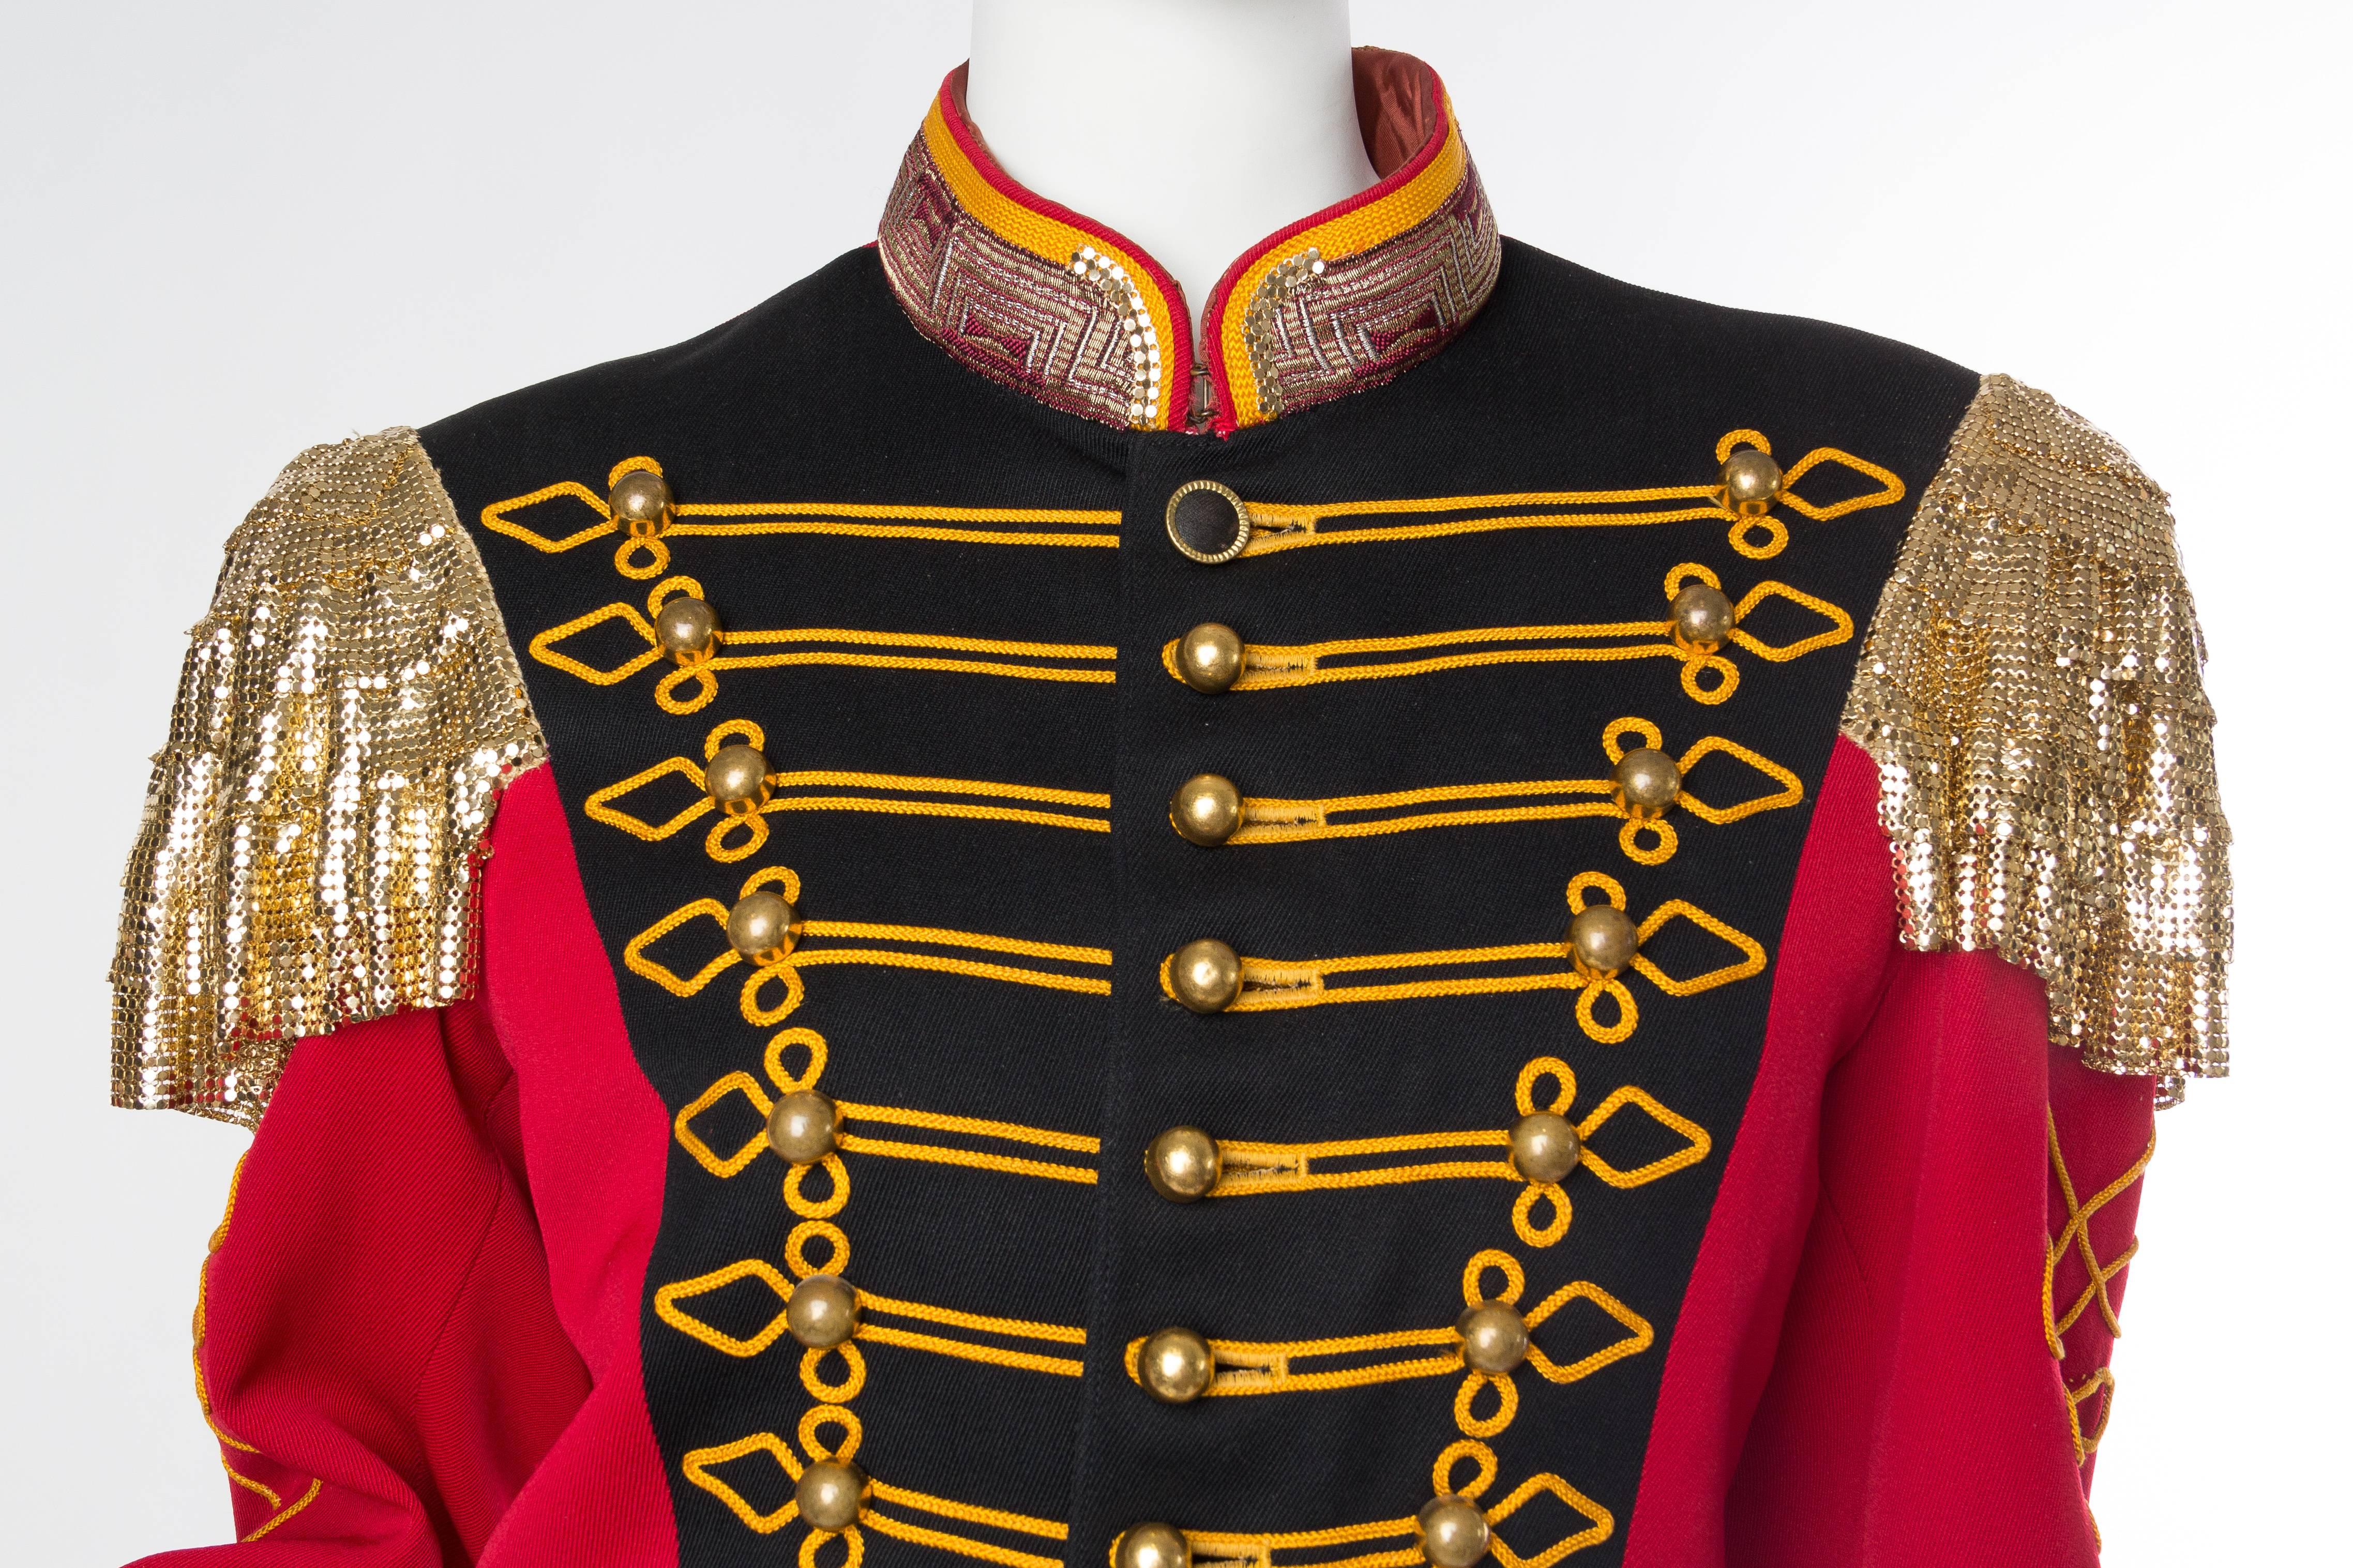 Red Vintage Military Band Jacket with Metal Mesh Details